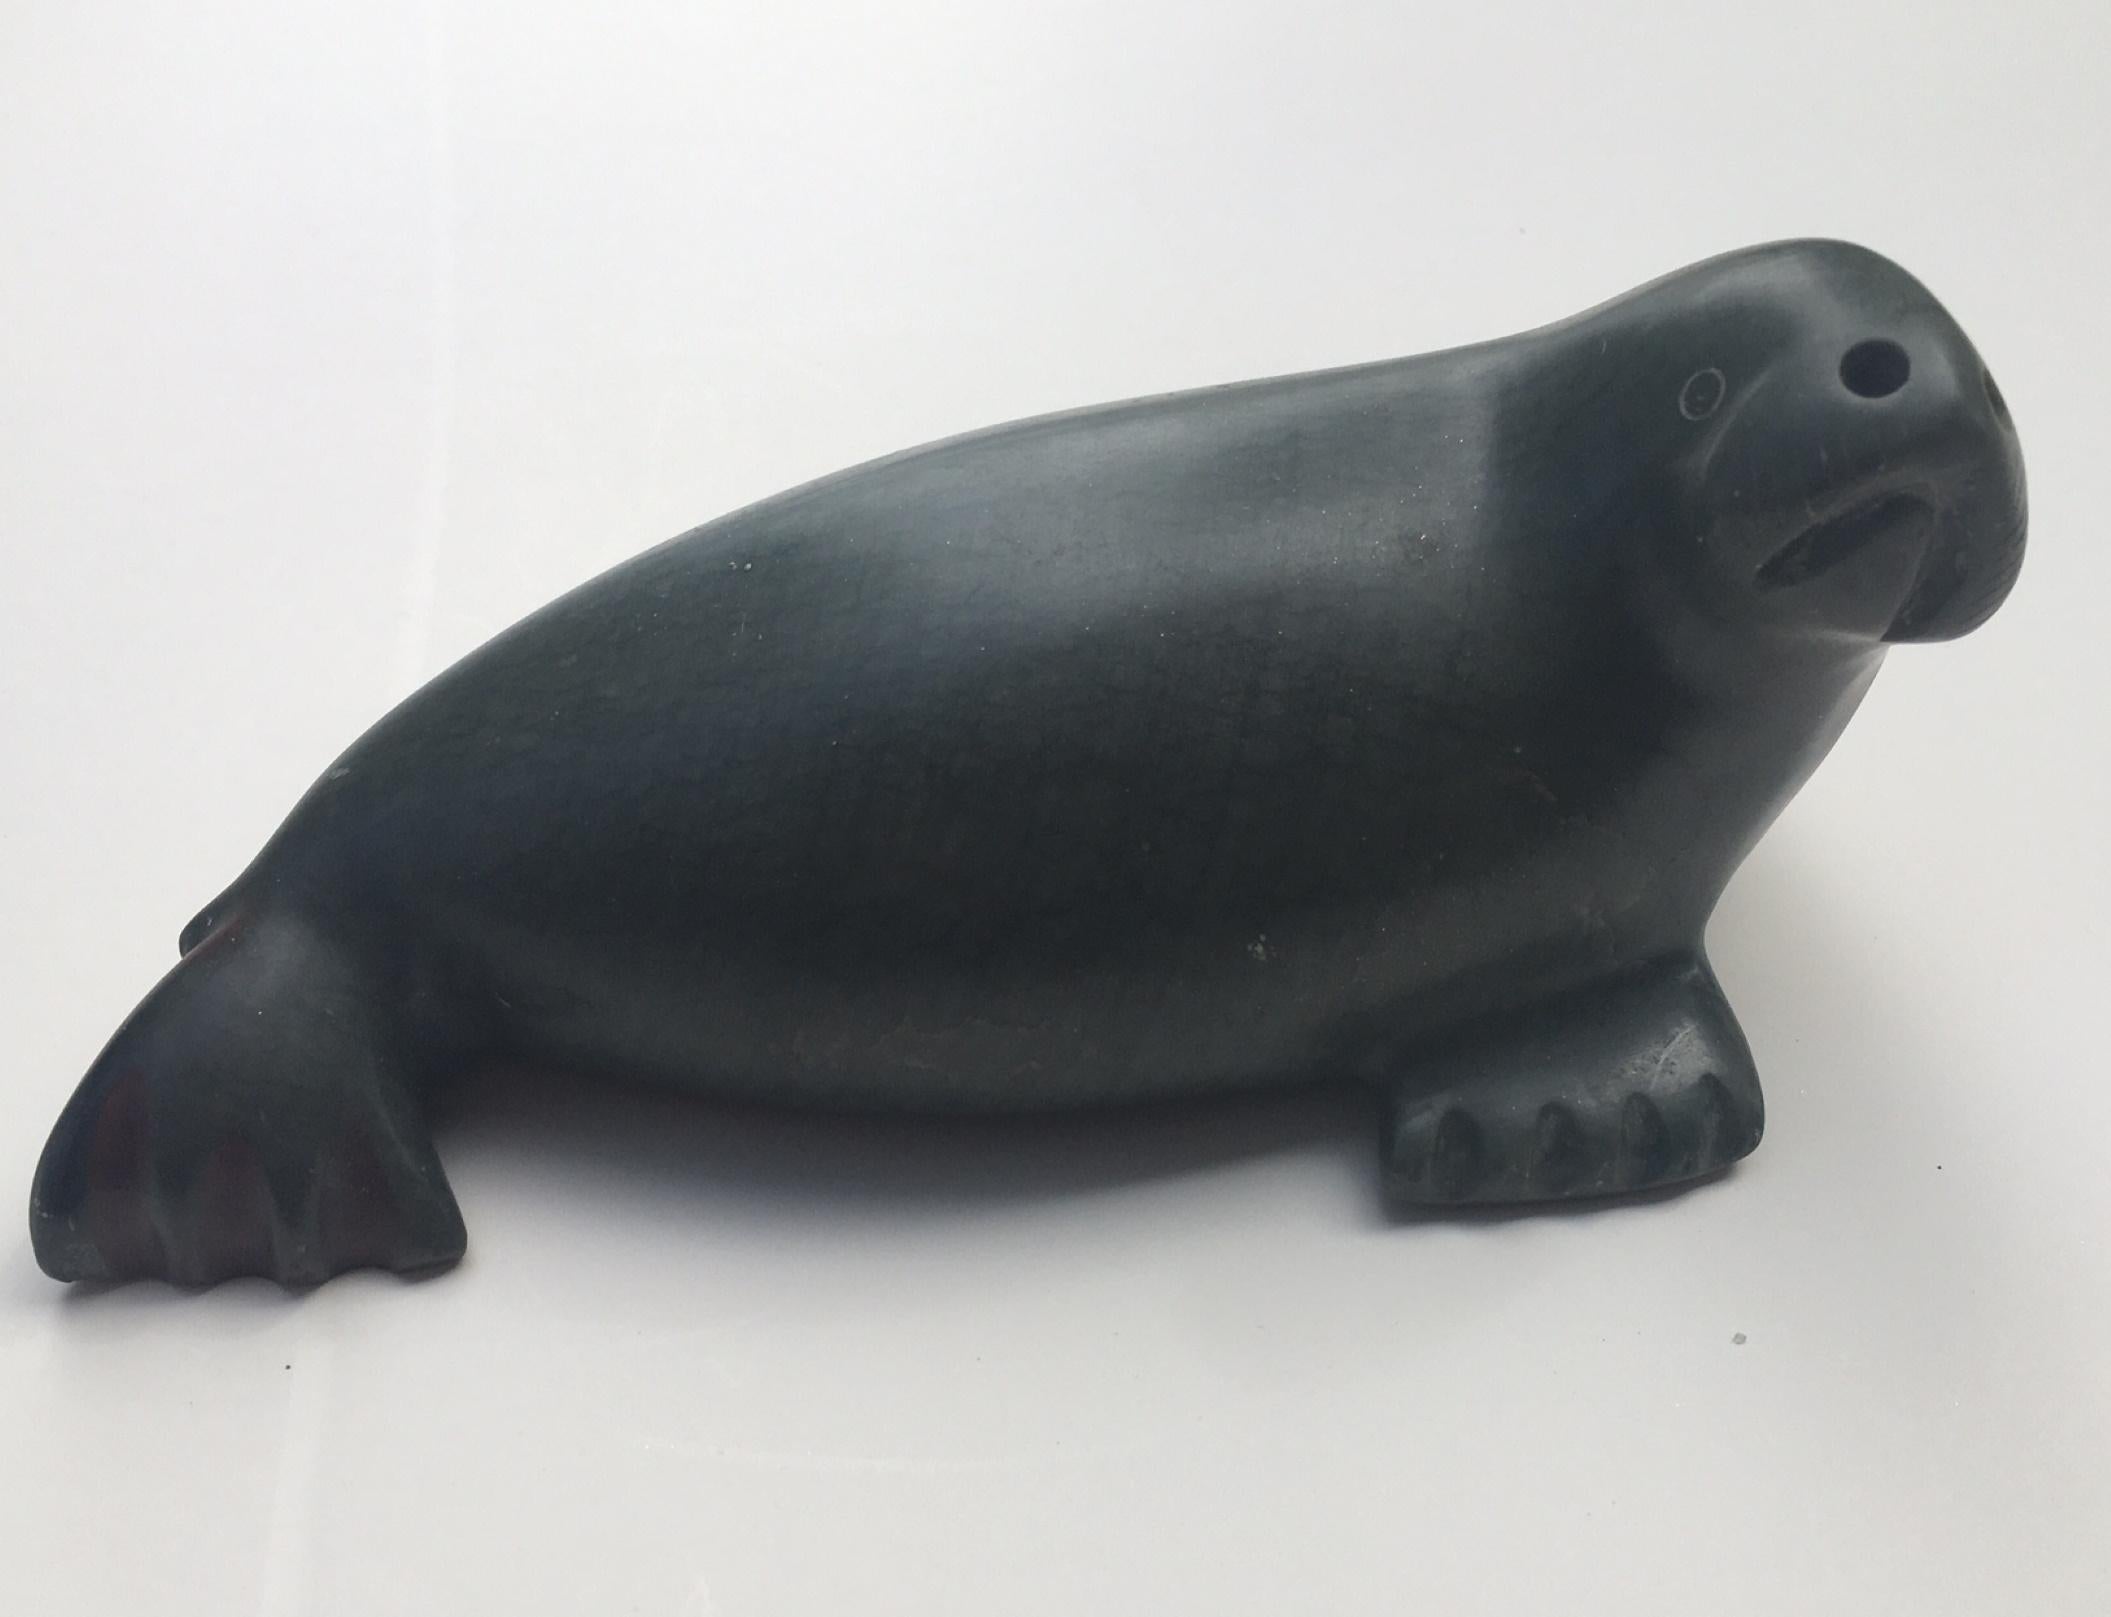 Inuit Stone Seal Sculpture Carving by Pauta Saila 1916 - 2009 1